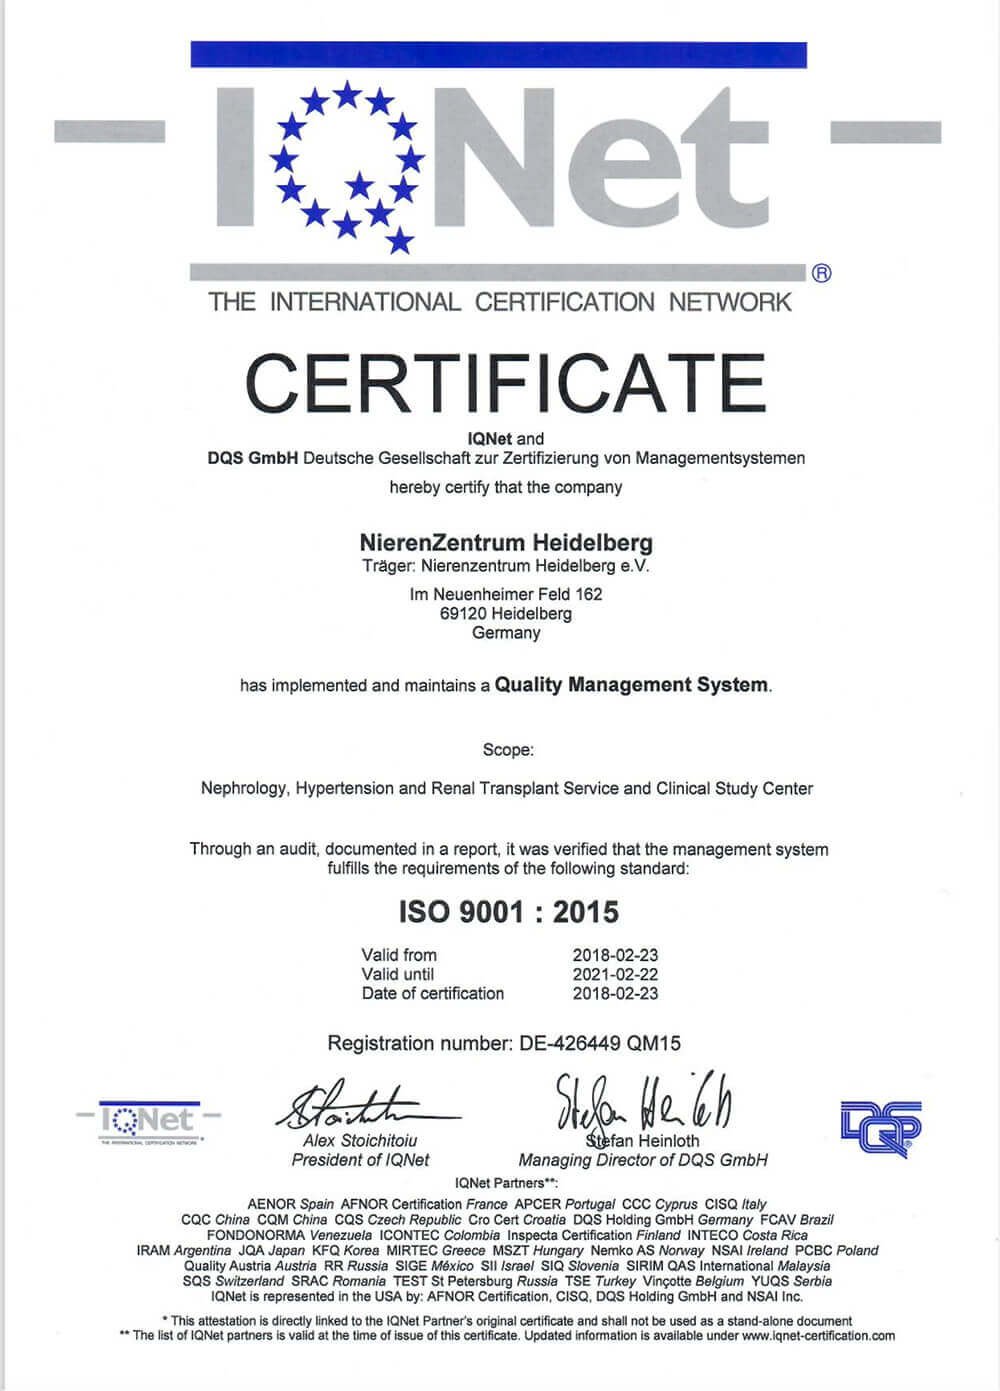 ISO 9001 for Quality Management System